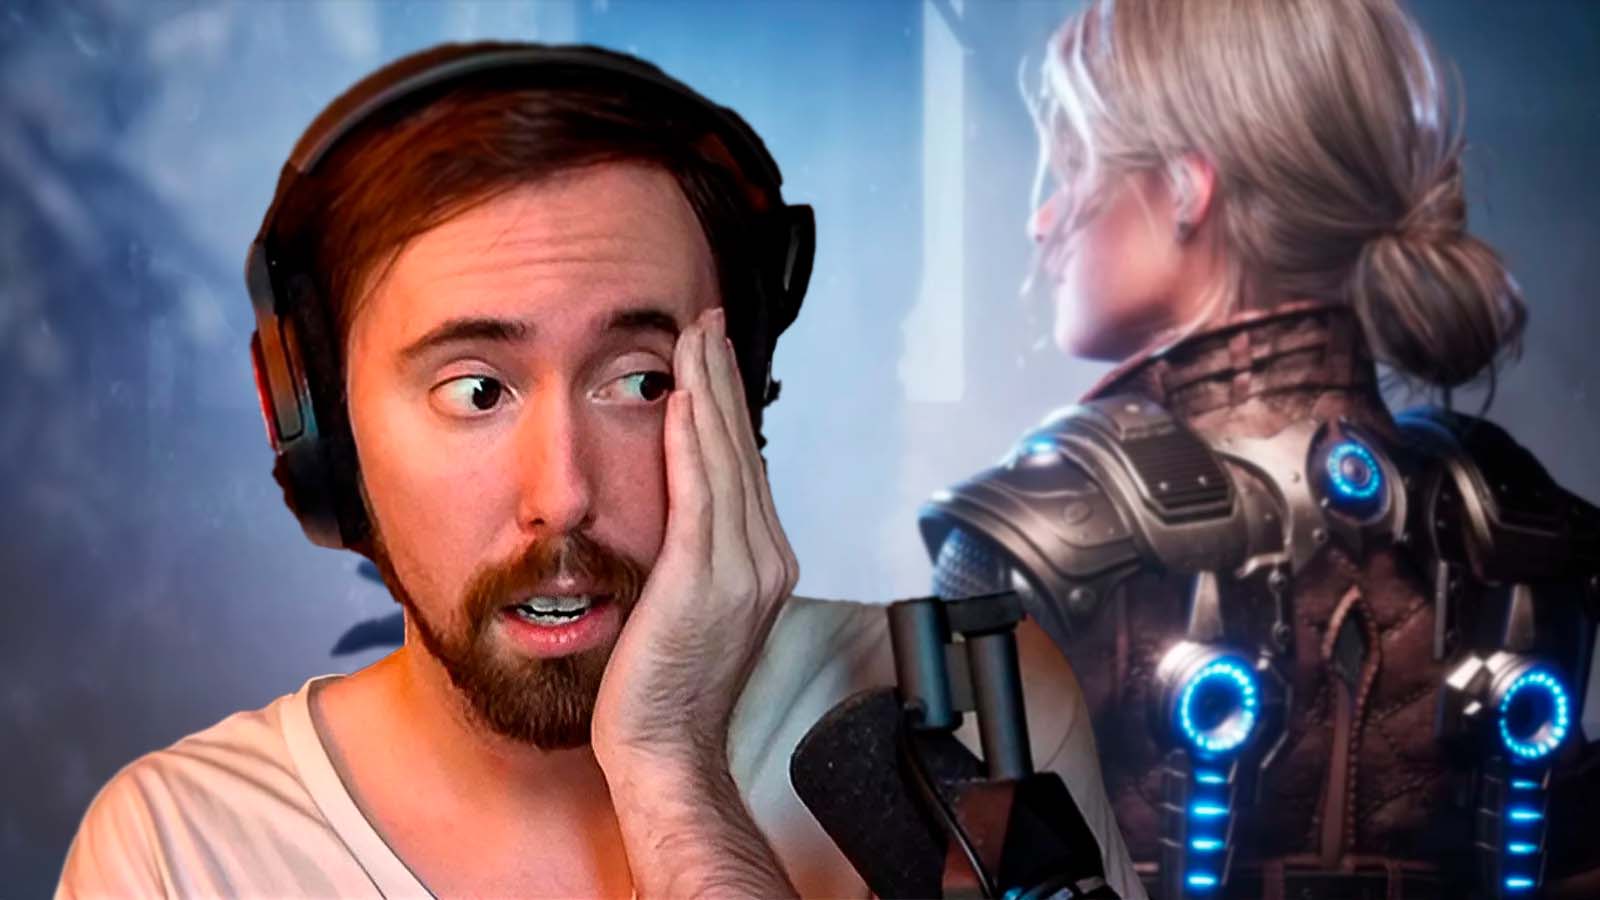 Asmongold looking at The First Descendant character